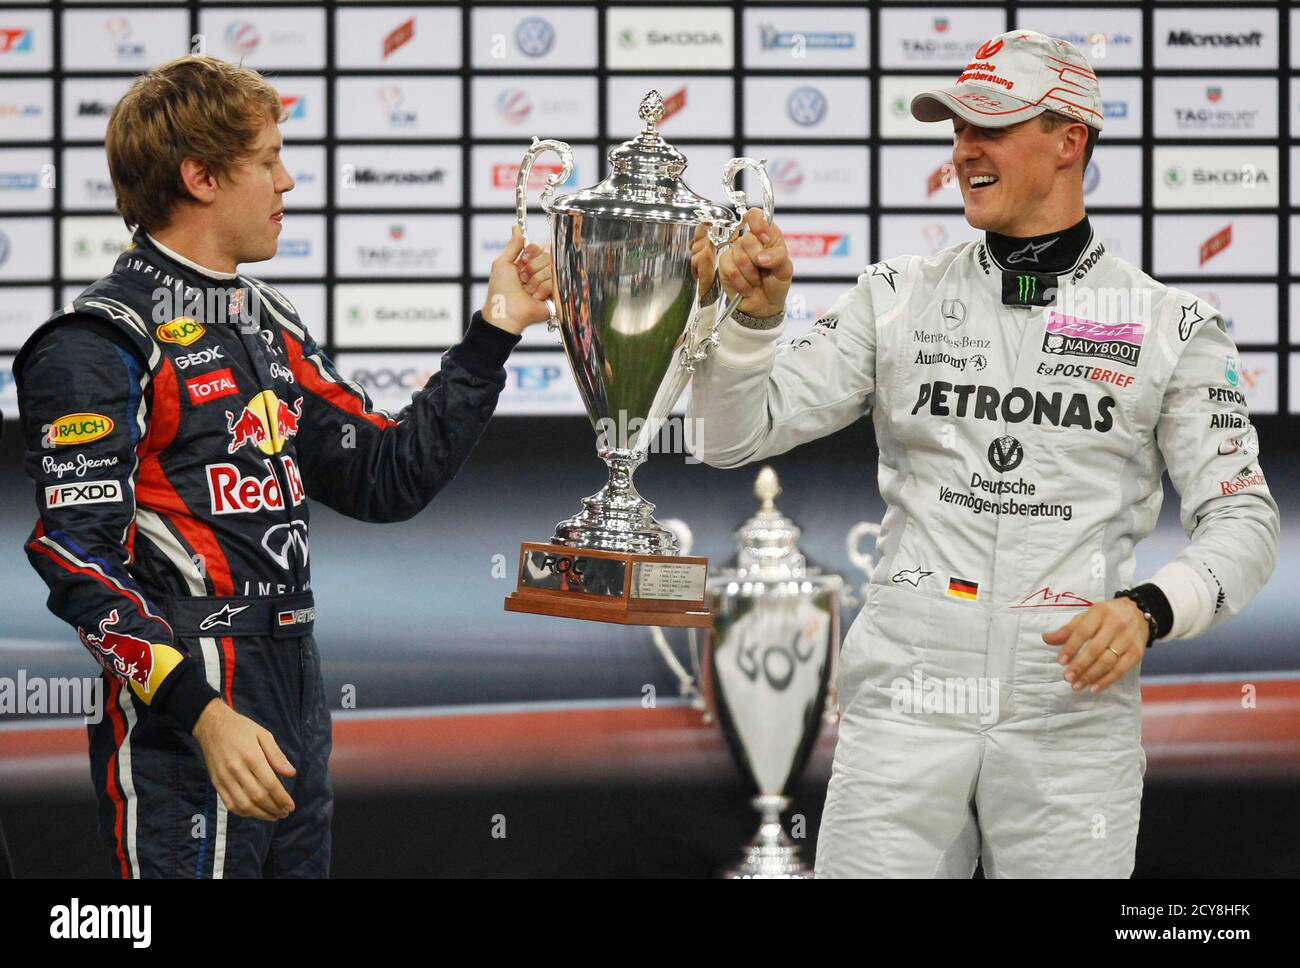 Sammentræf selvfølgelig At blokere Formula One drivers Michael Schumacher (R) and Sebastian Vettel celebrate  after winning the Nations Cup of the Race of Champions (ROC) at the Esprit  Arena in Duesseldorf December 3, 2011. REUTERS/Alex Domanski (